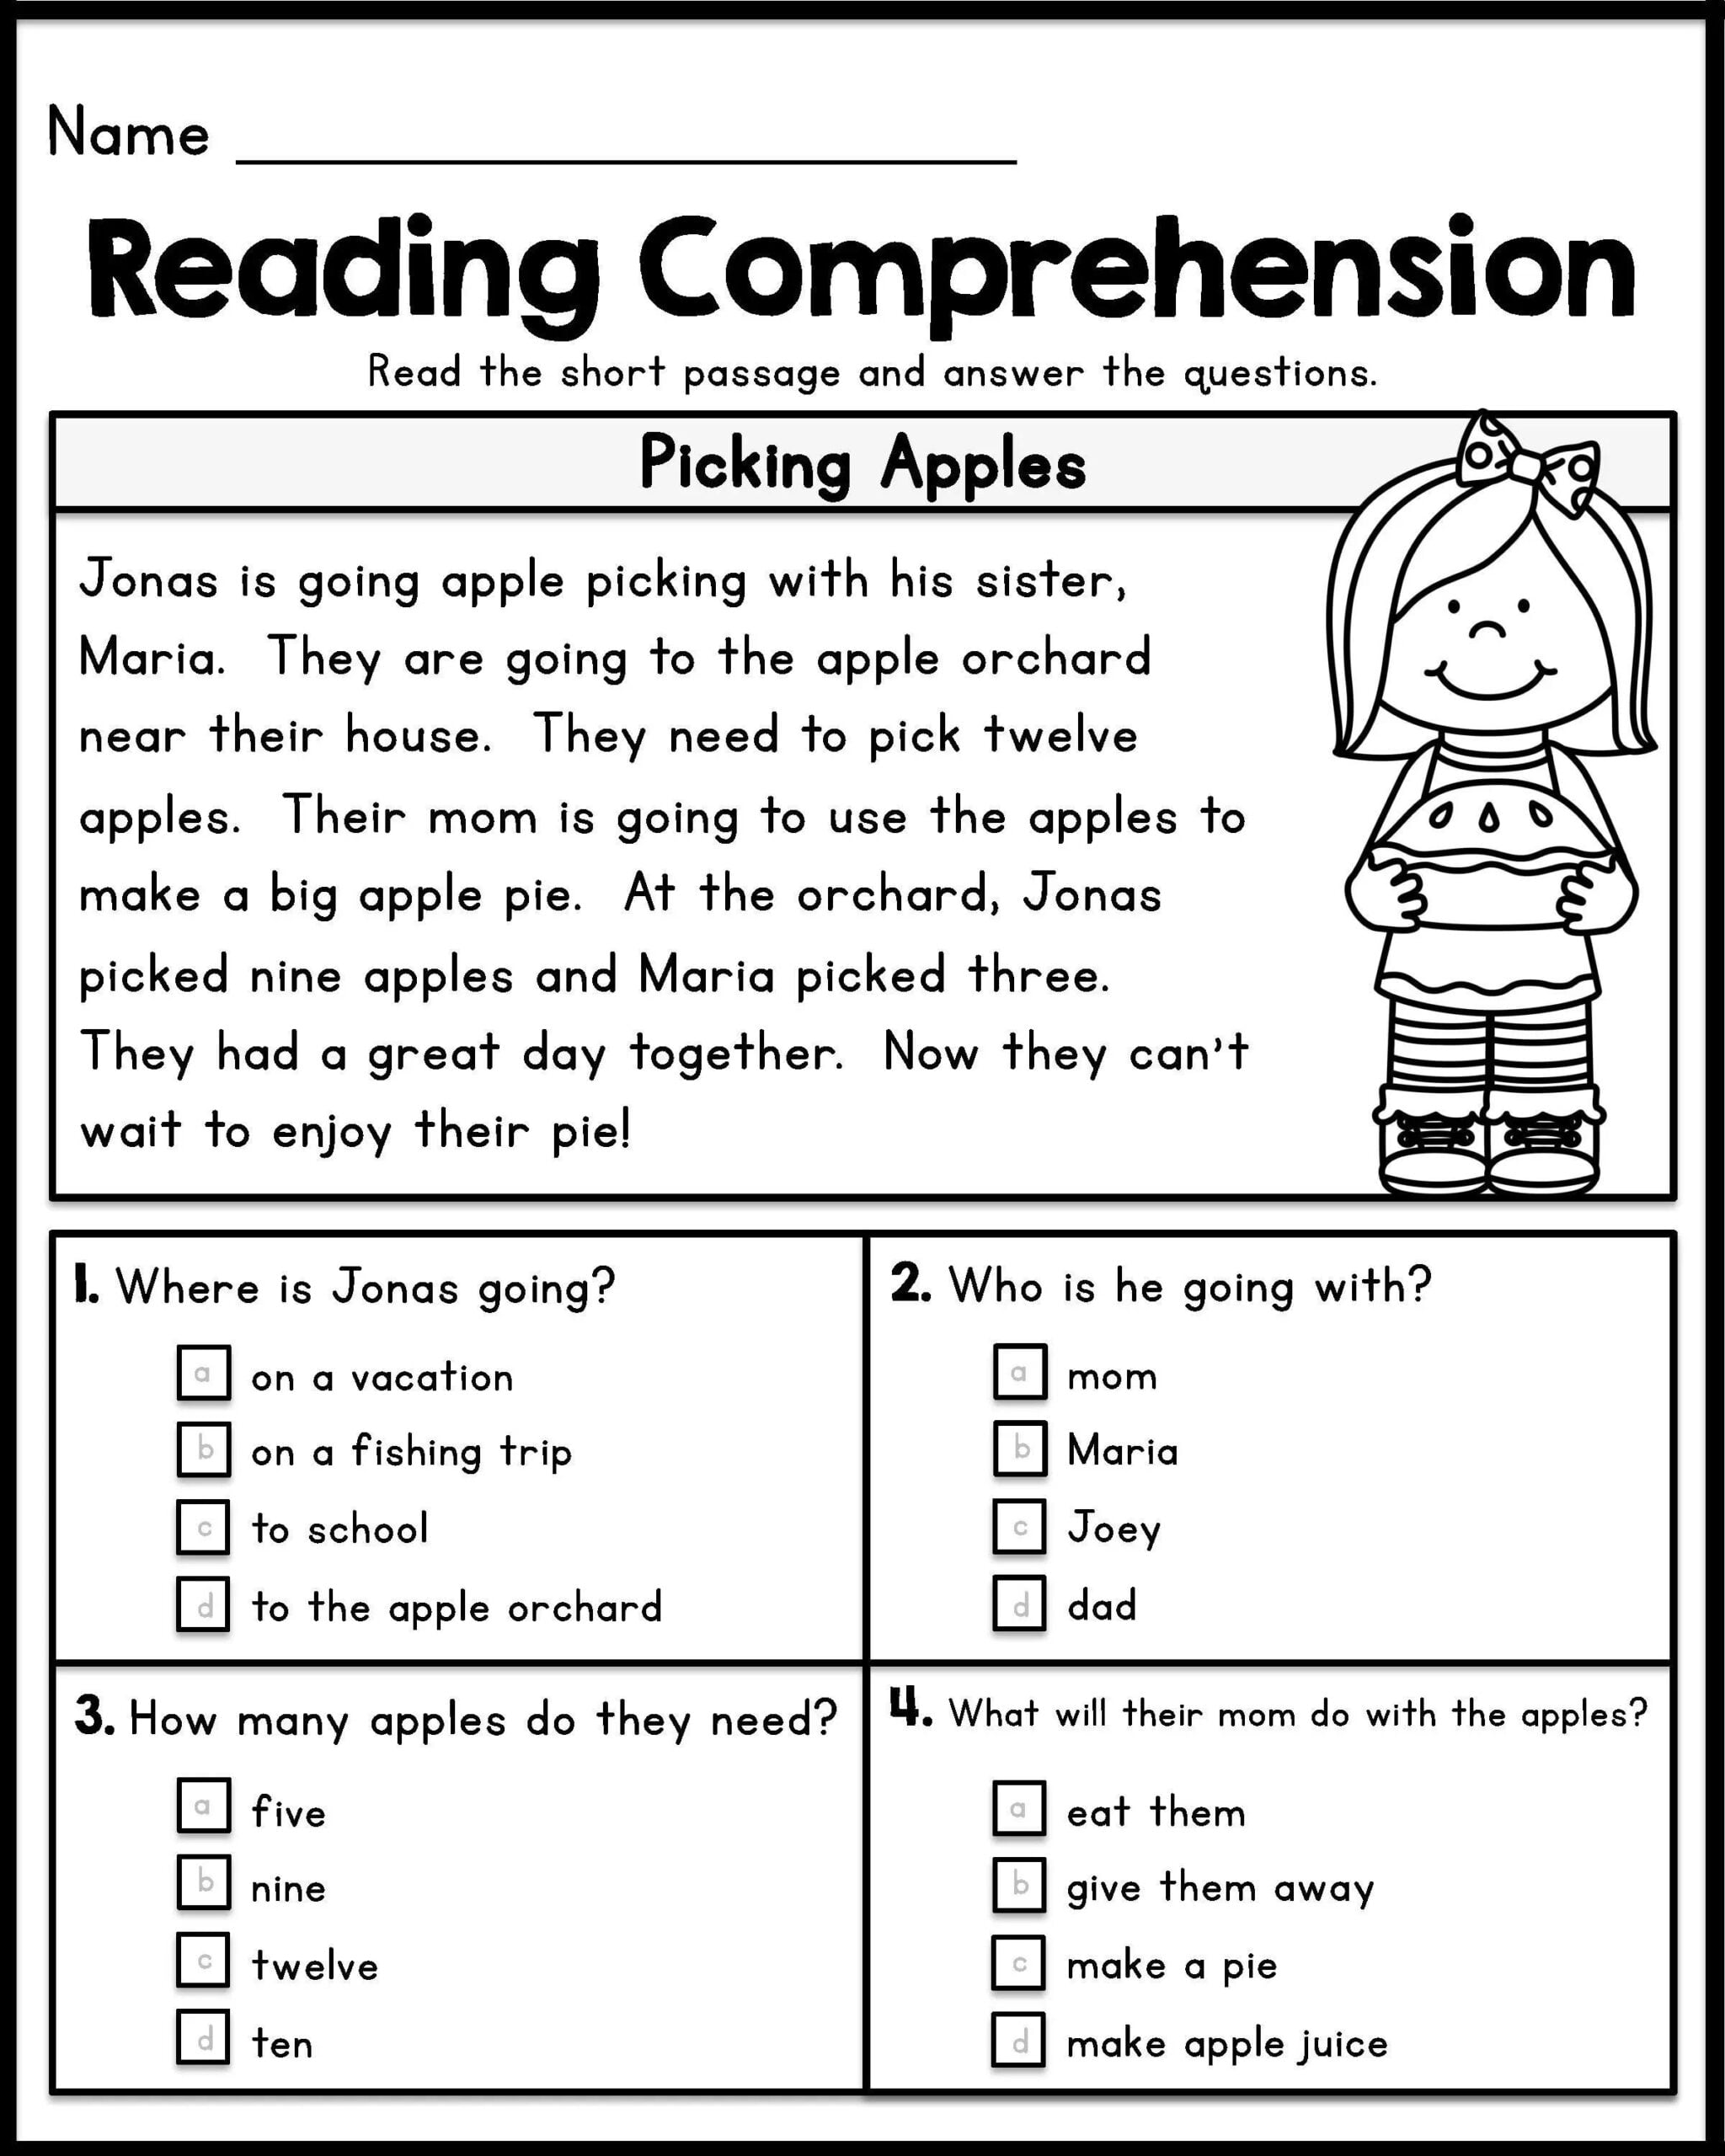 Free Printable Reading Comprehension Worksheets For First Grade